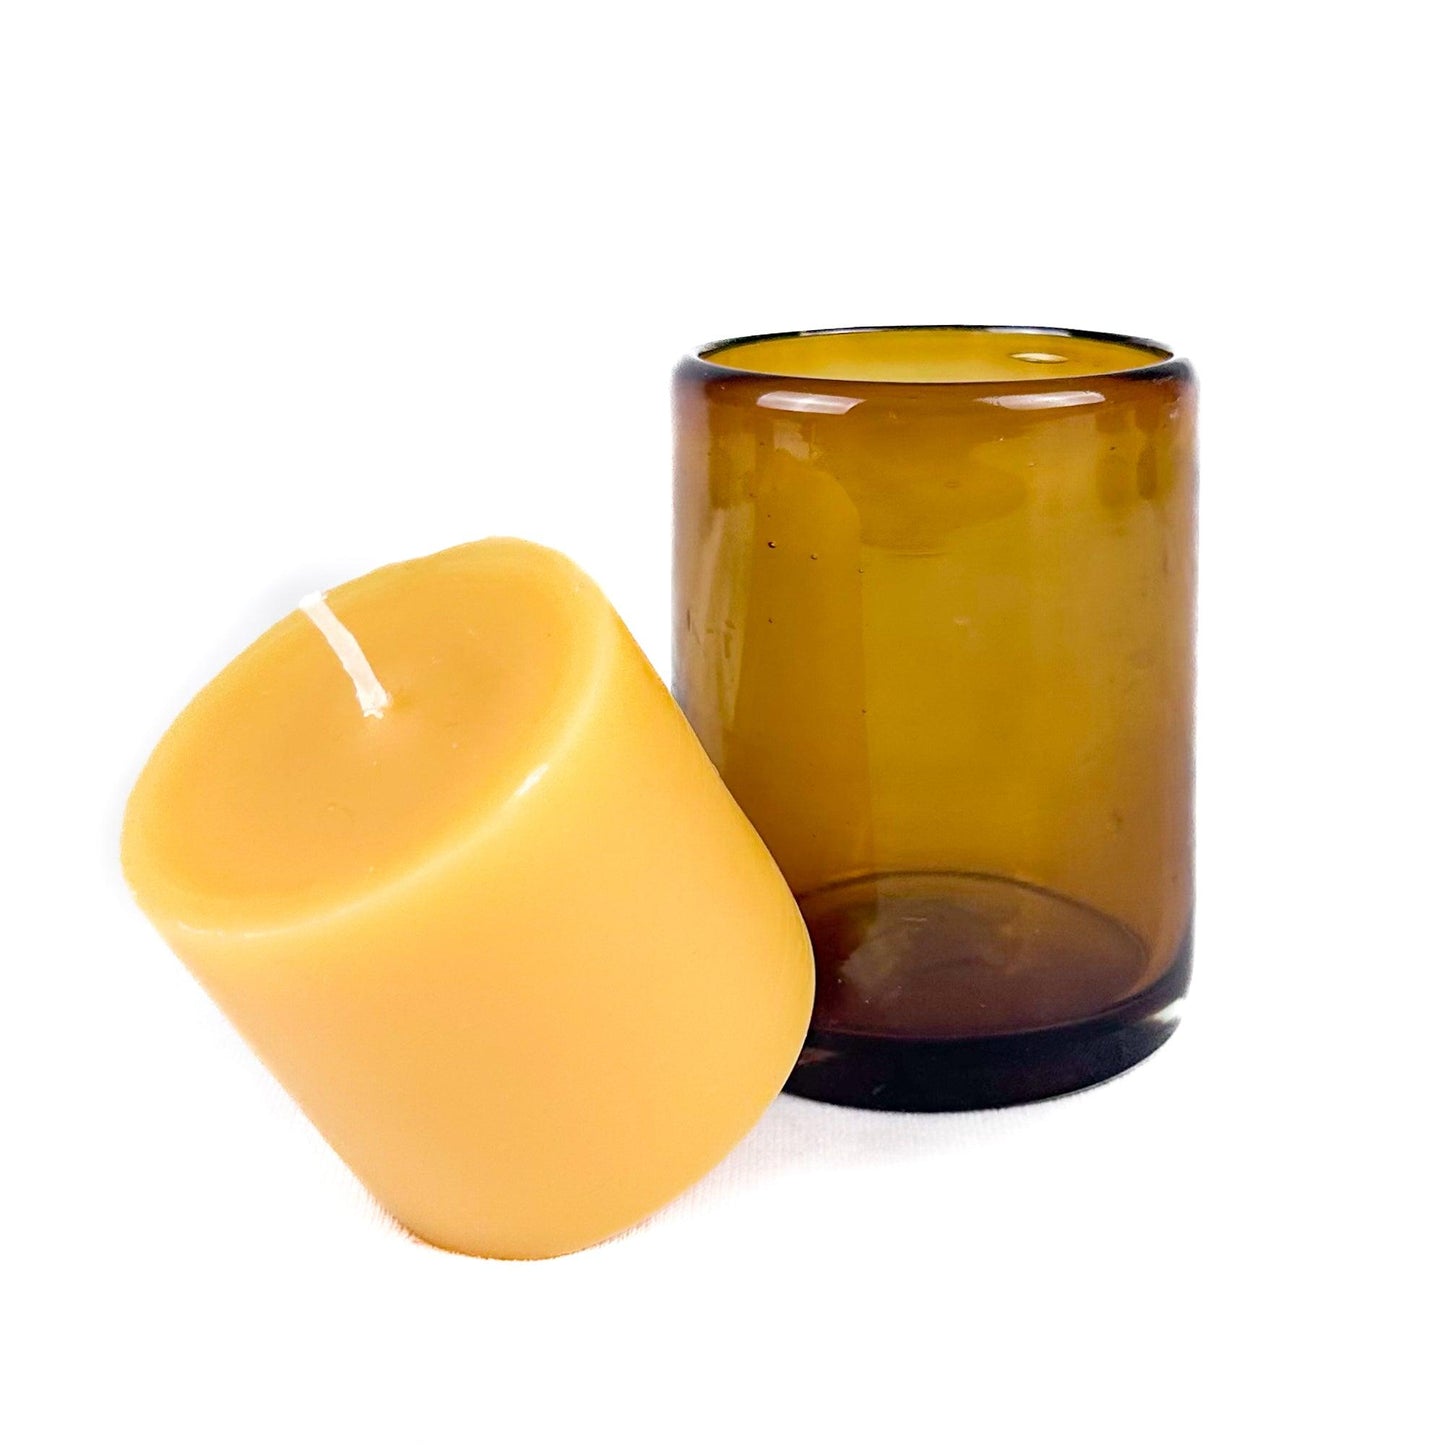 NEW Refill - Pure Beeswax Candle for Blown Glass - Bluecorn Candles